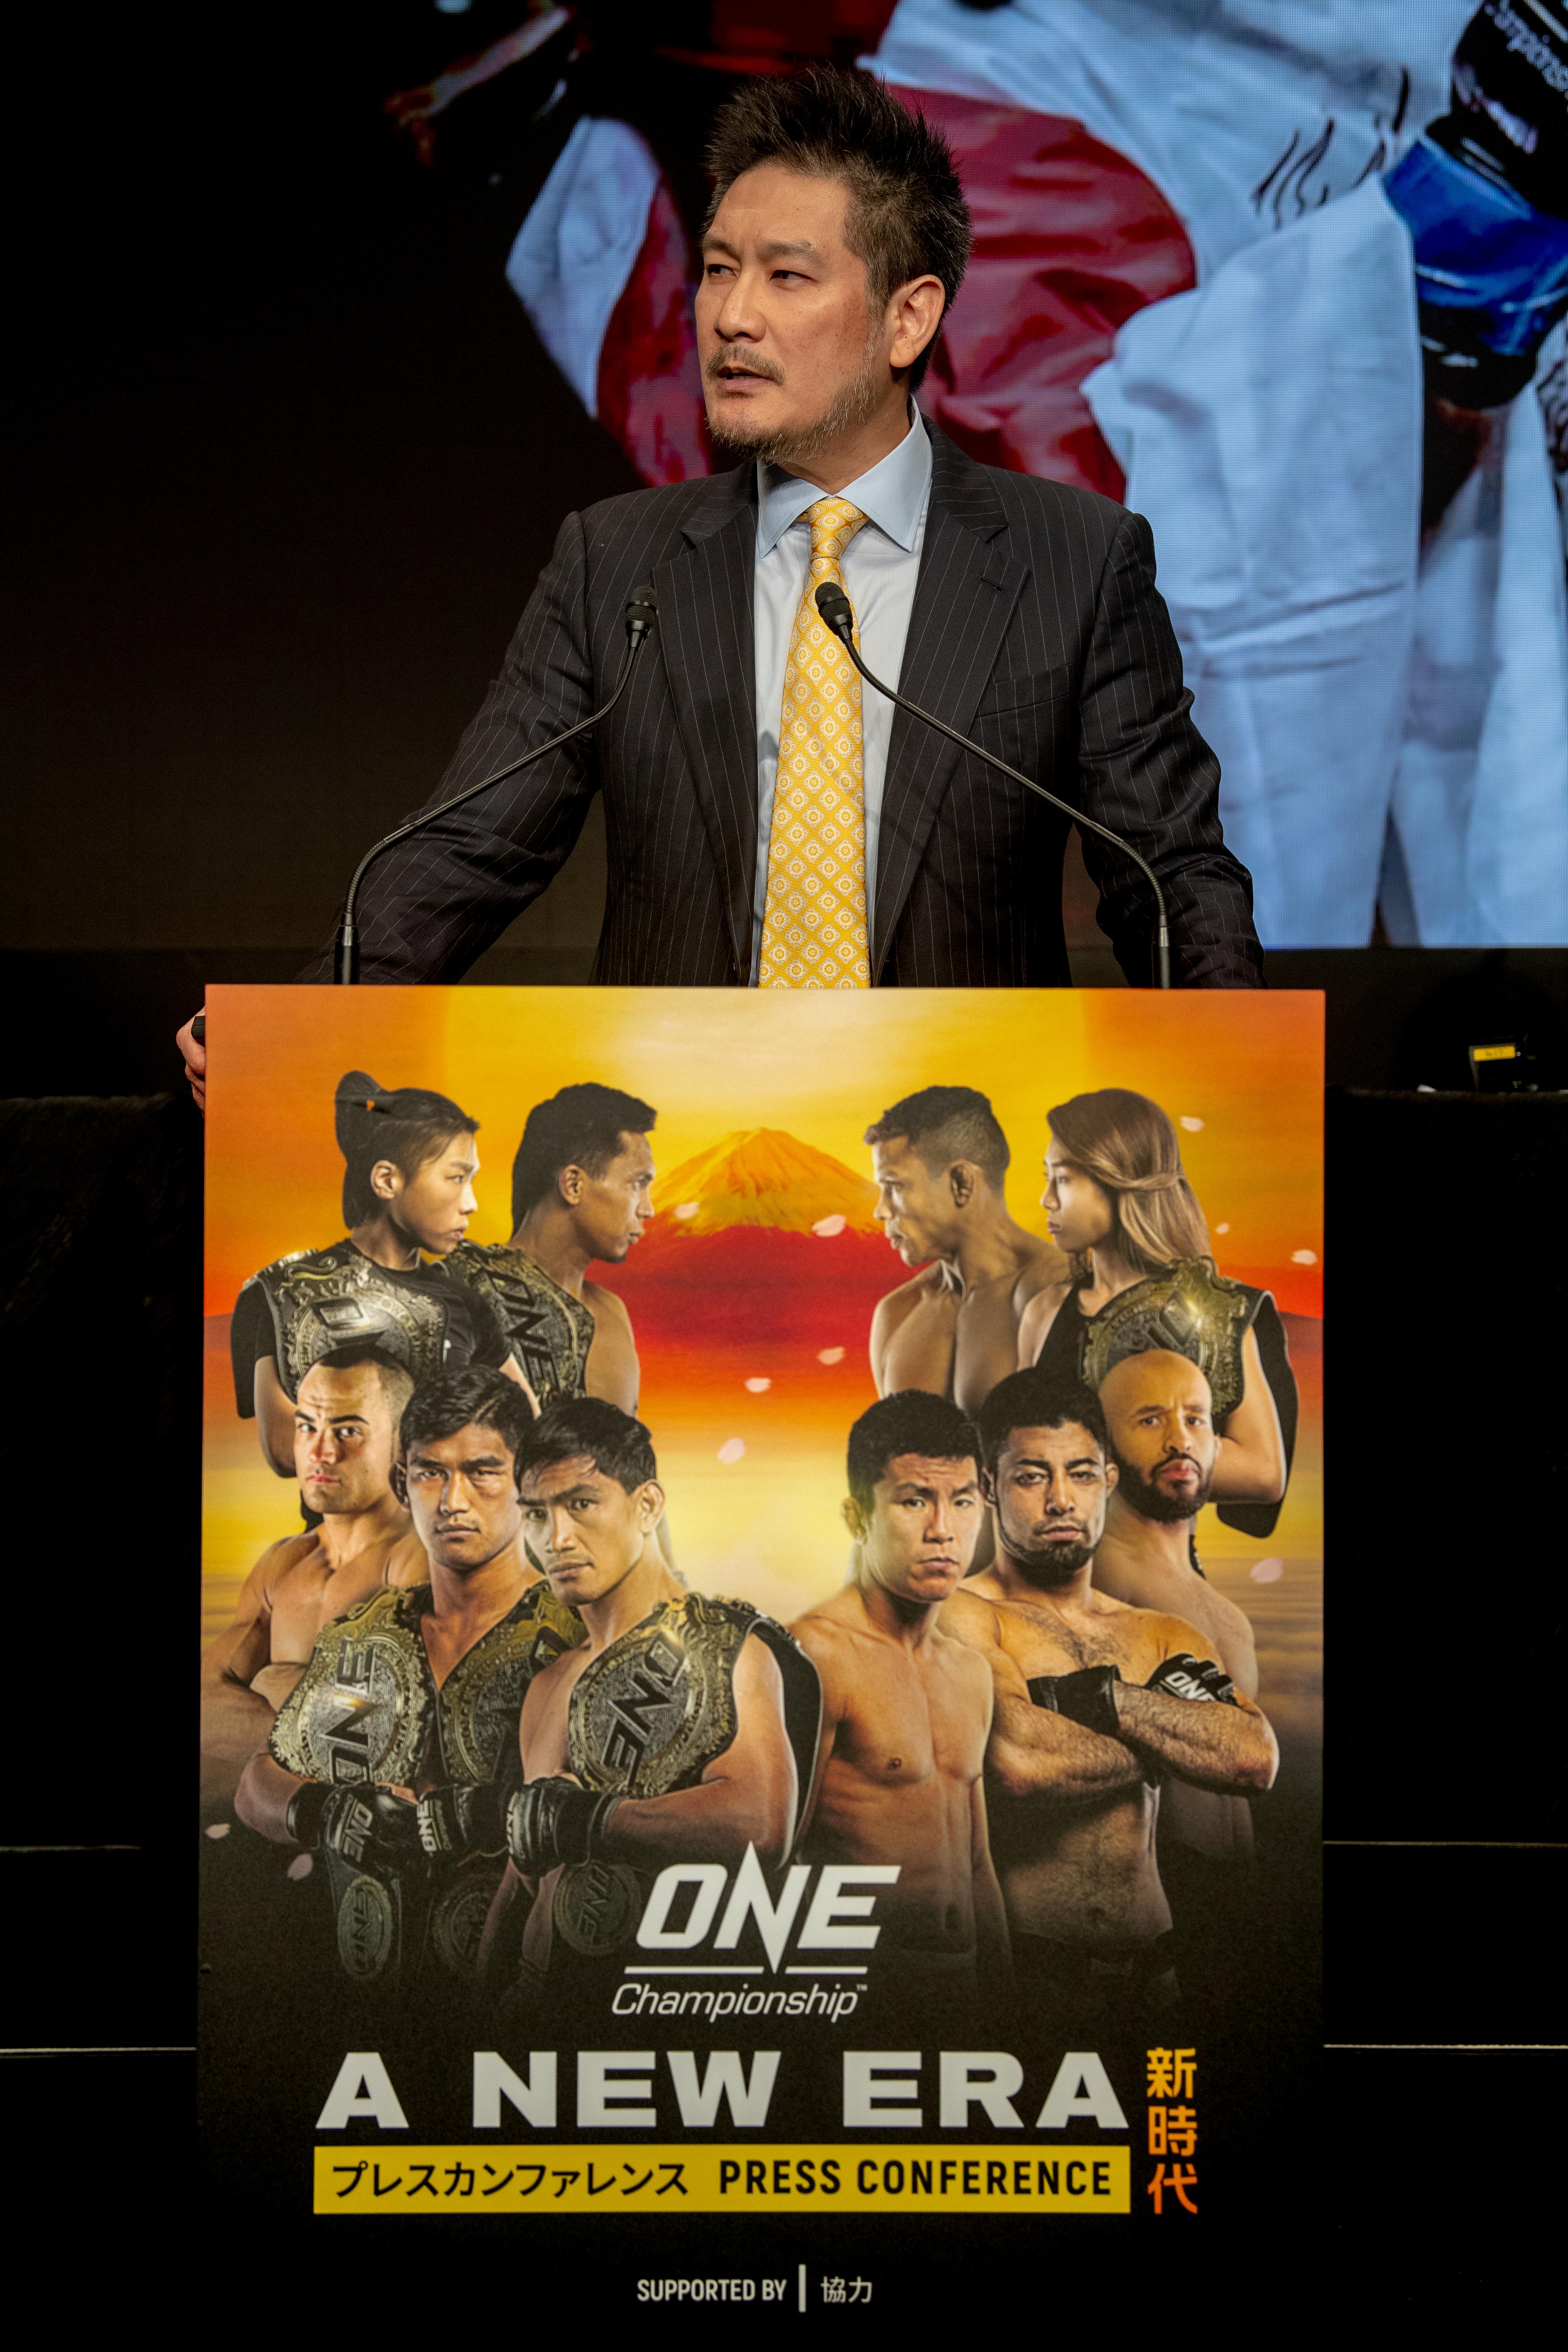 ONE Championship CEO Chatri Sityodtong: We don't sell fights